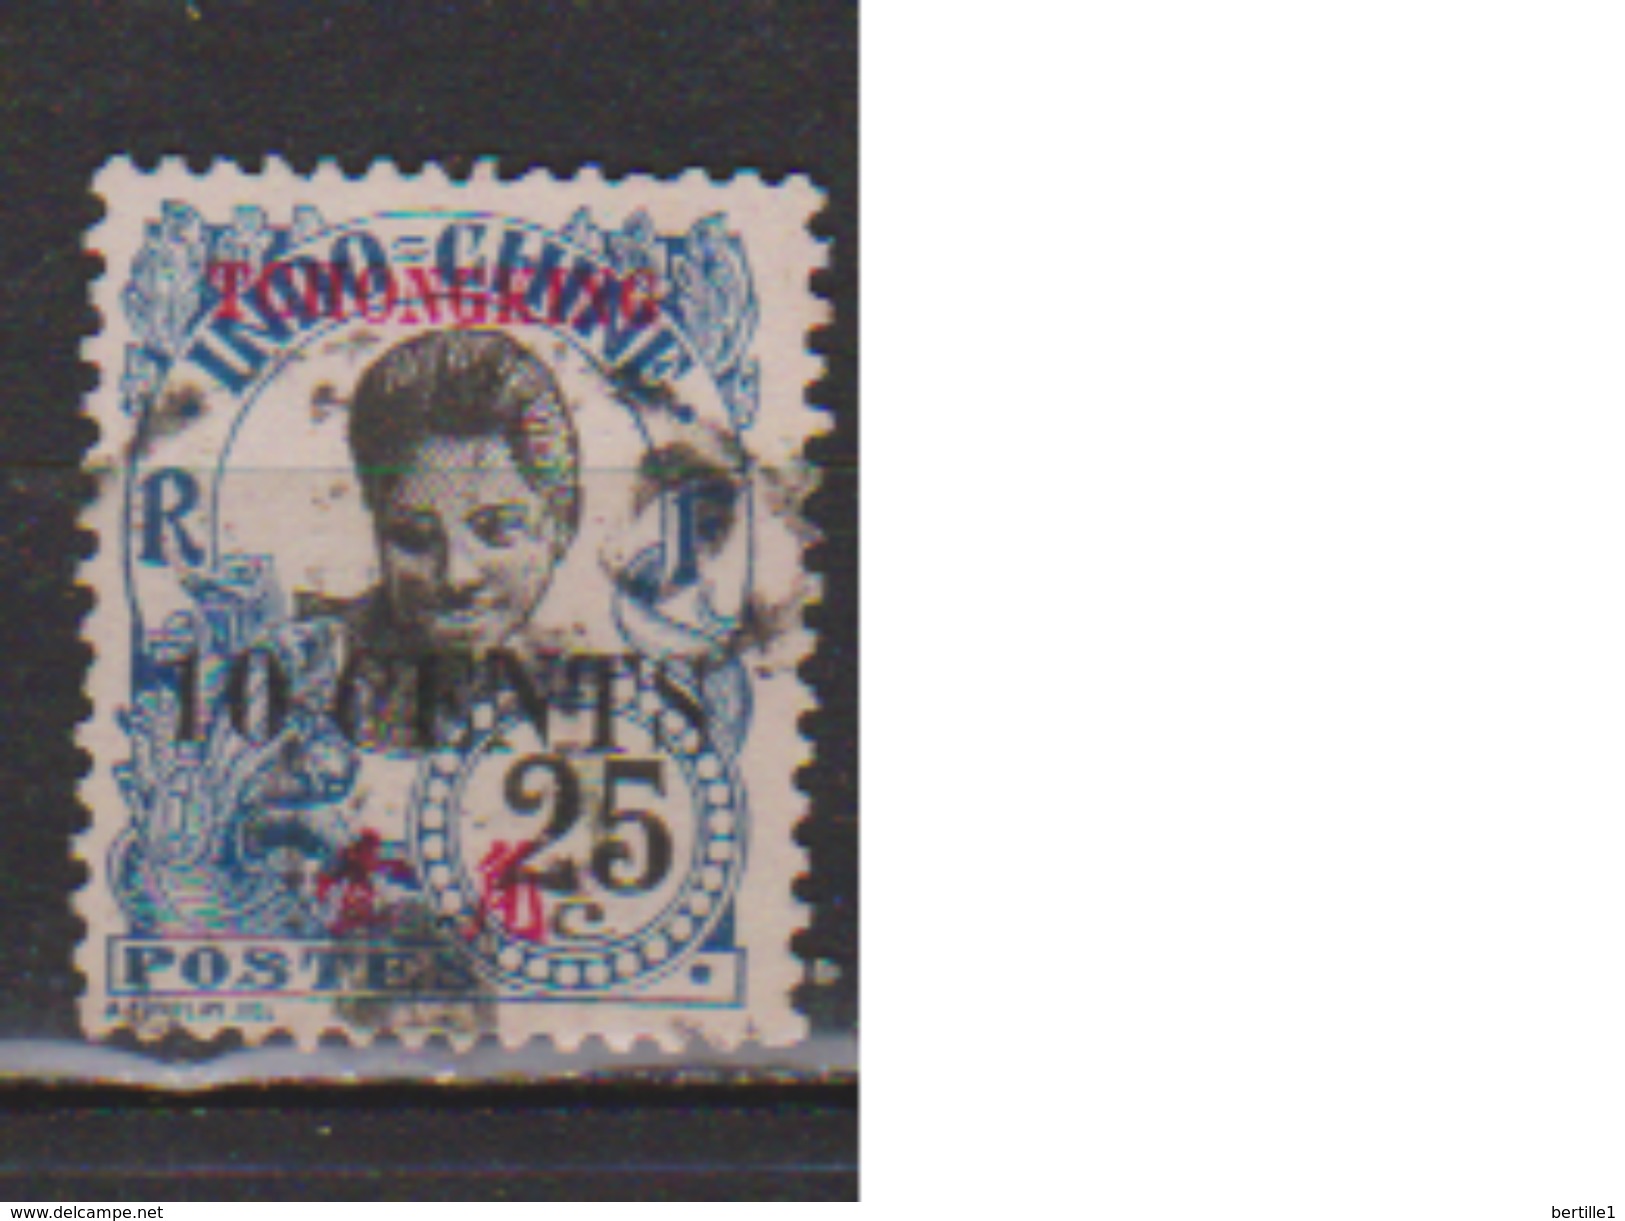 TCHONG KING             N°  89   ( 5 )          OBLITERE         ( O    3467   ) - Used Stamps